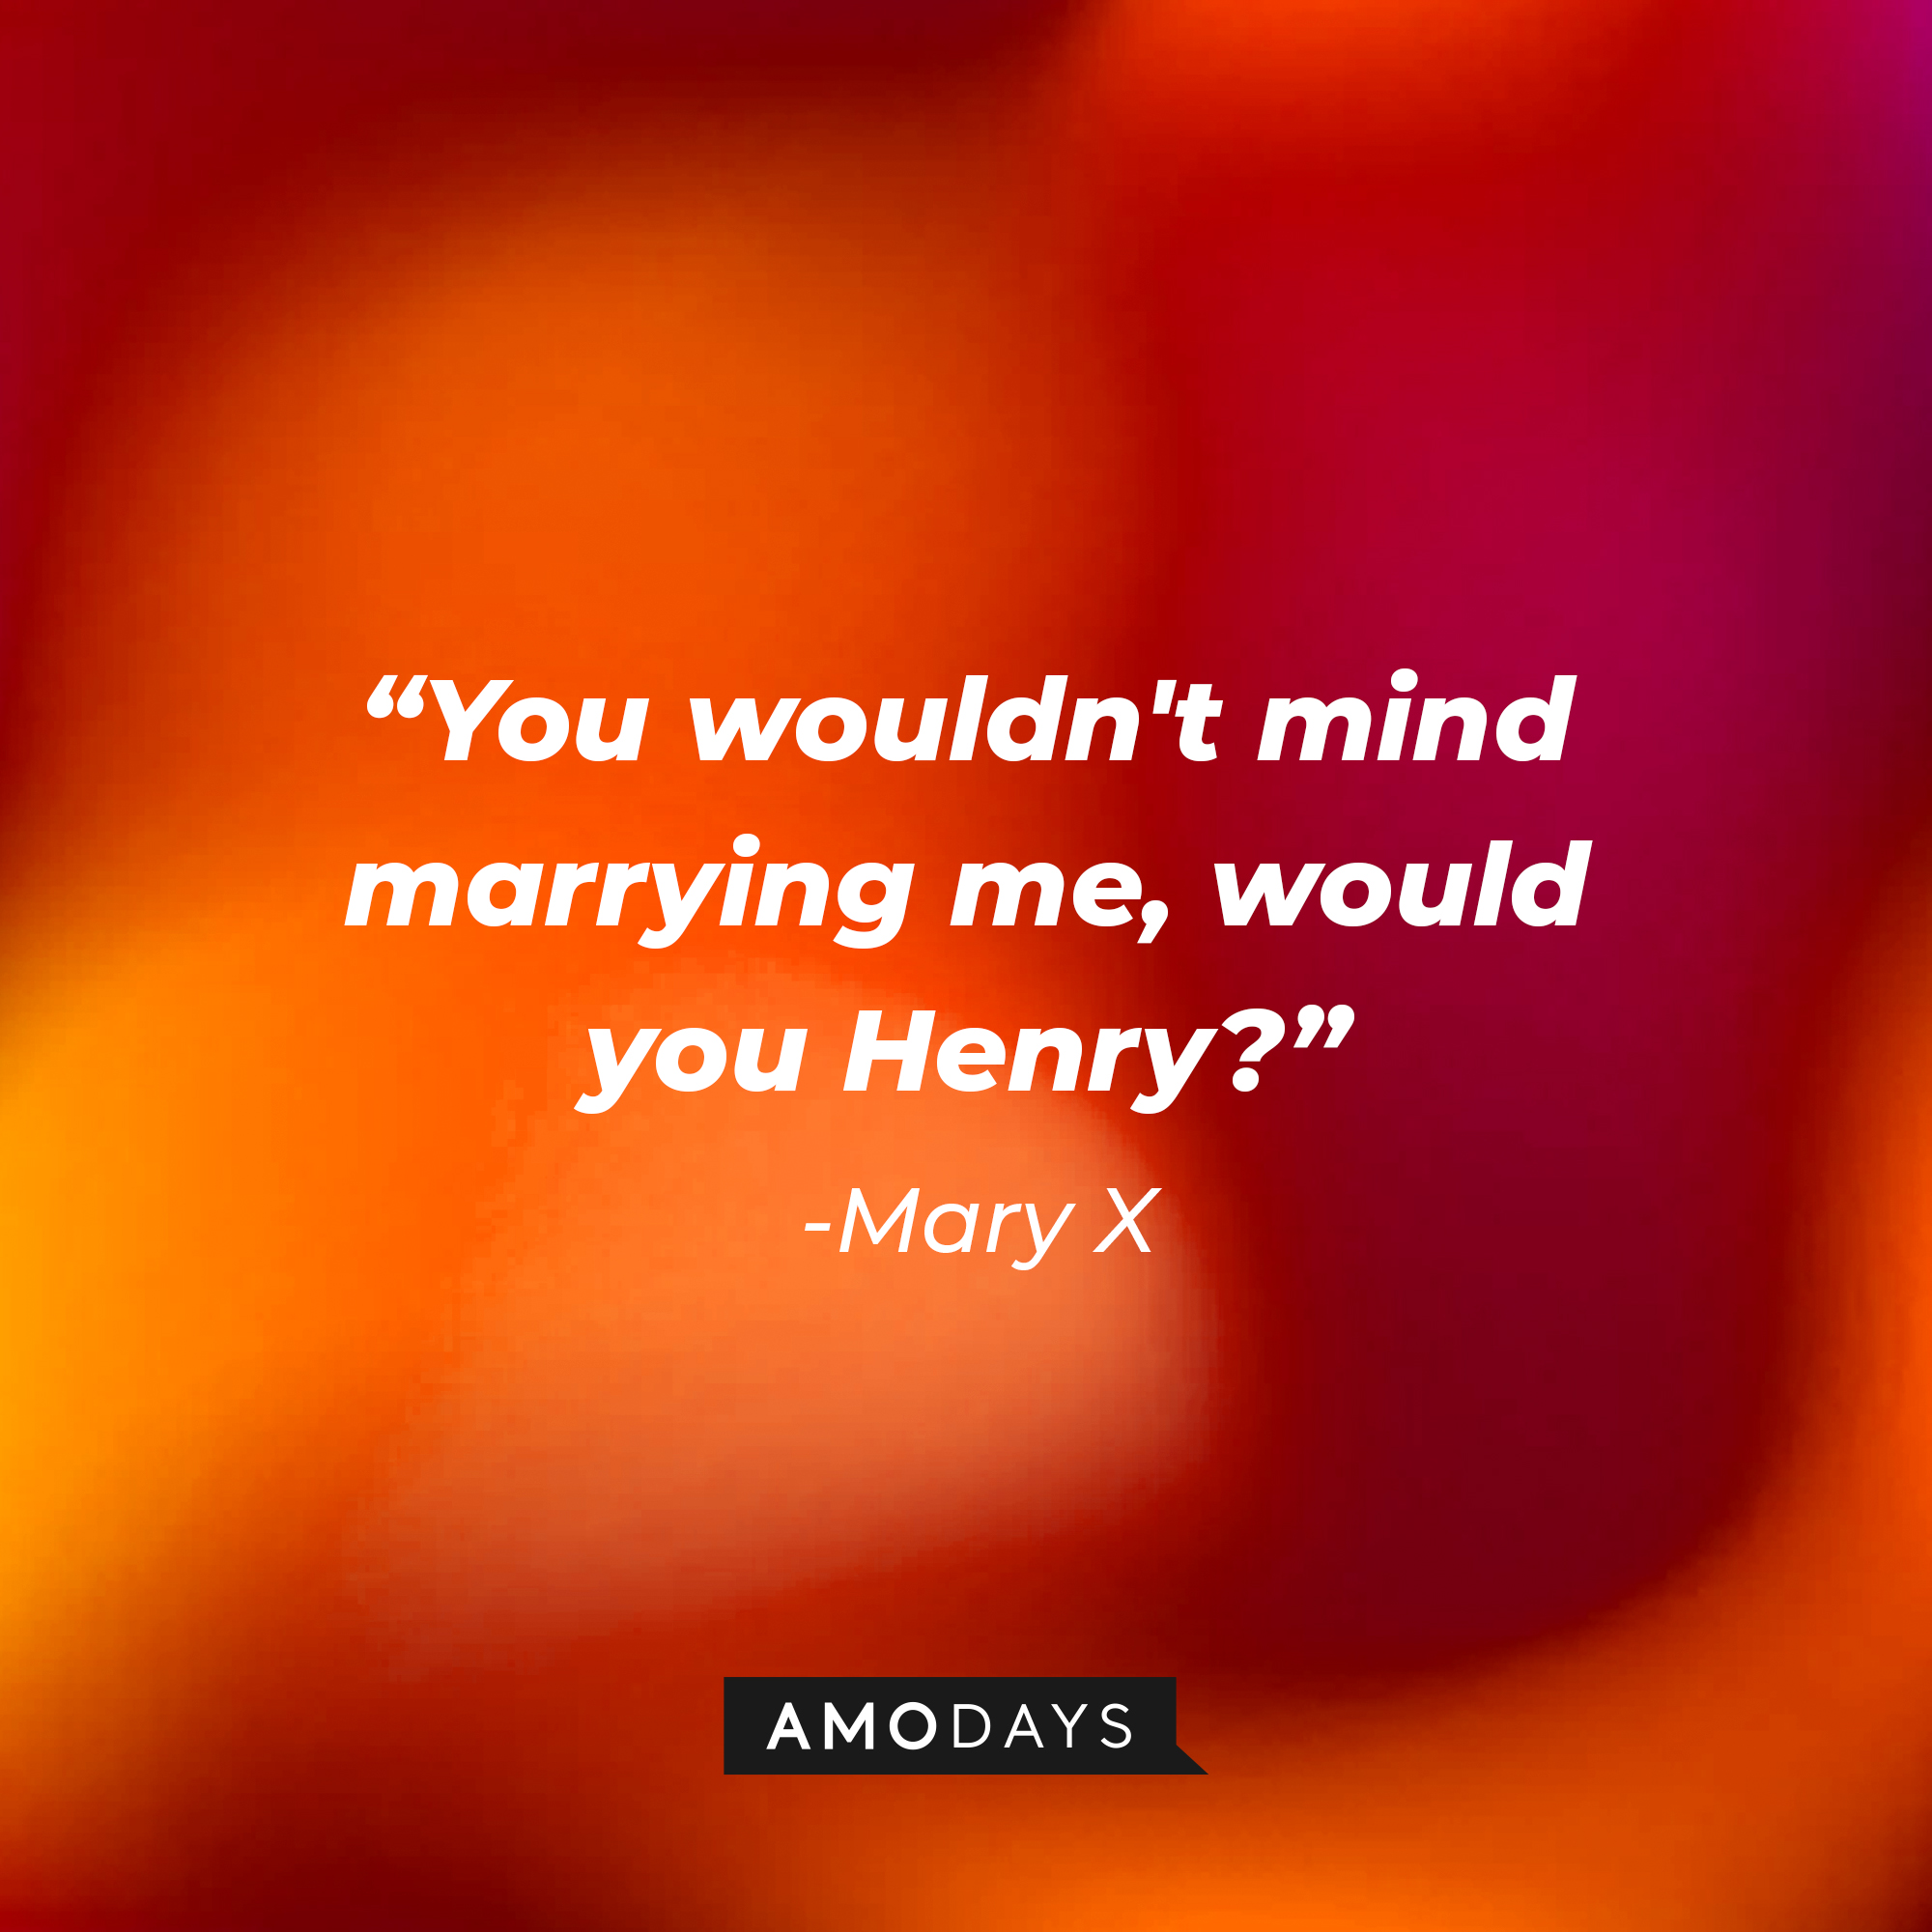 Mary X’s quote: “You wouldn't mind marrying me, would you , Henry?” |  Source: AmoDays